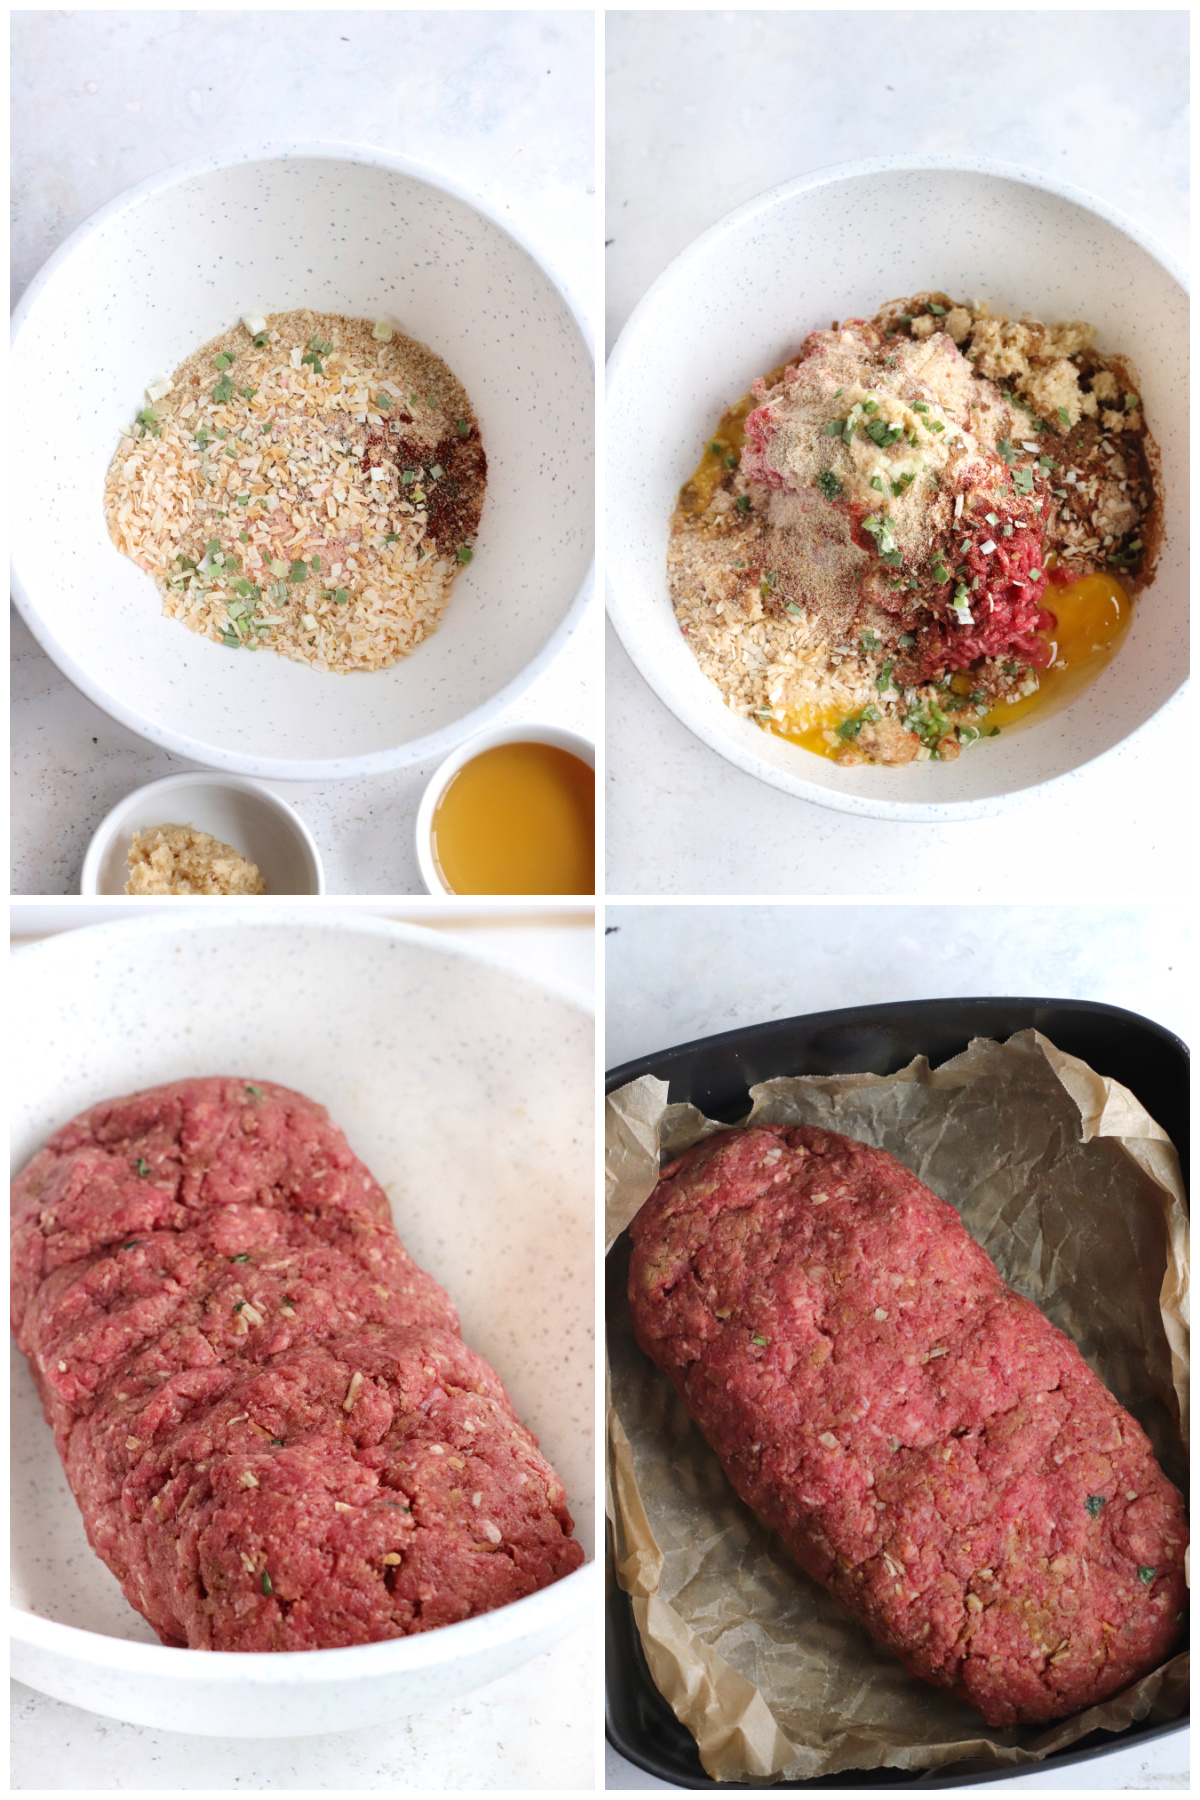 How to make air fryer meatloaf